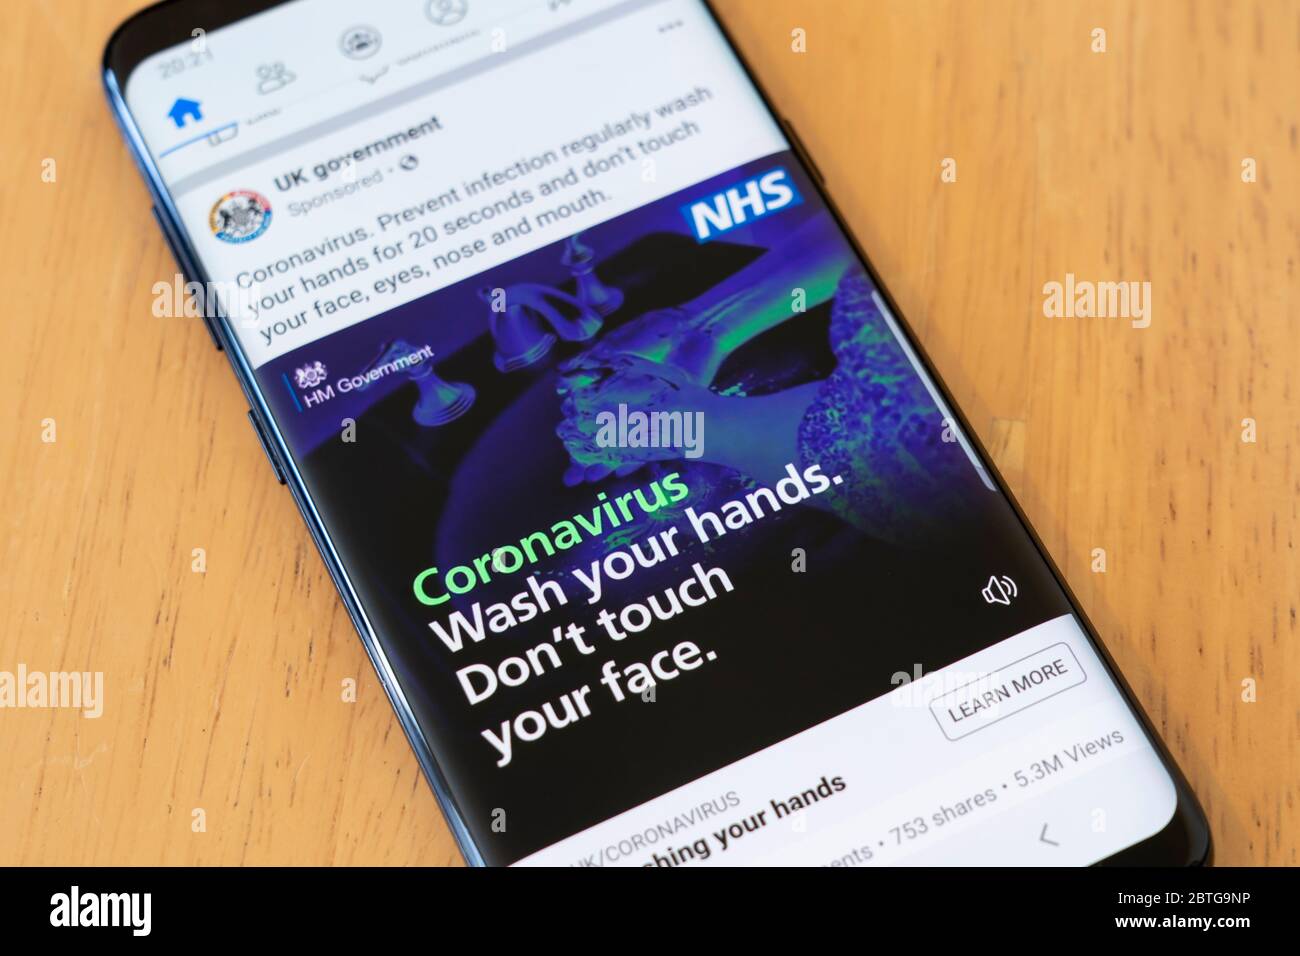 An advertisement from UK Government on a smartphone screen warning the British public to Wash your hands. Don't touch your face. Covid 19 Coronavirus Stock Photo